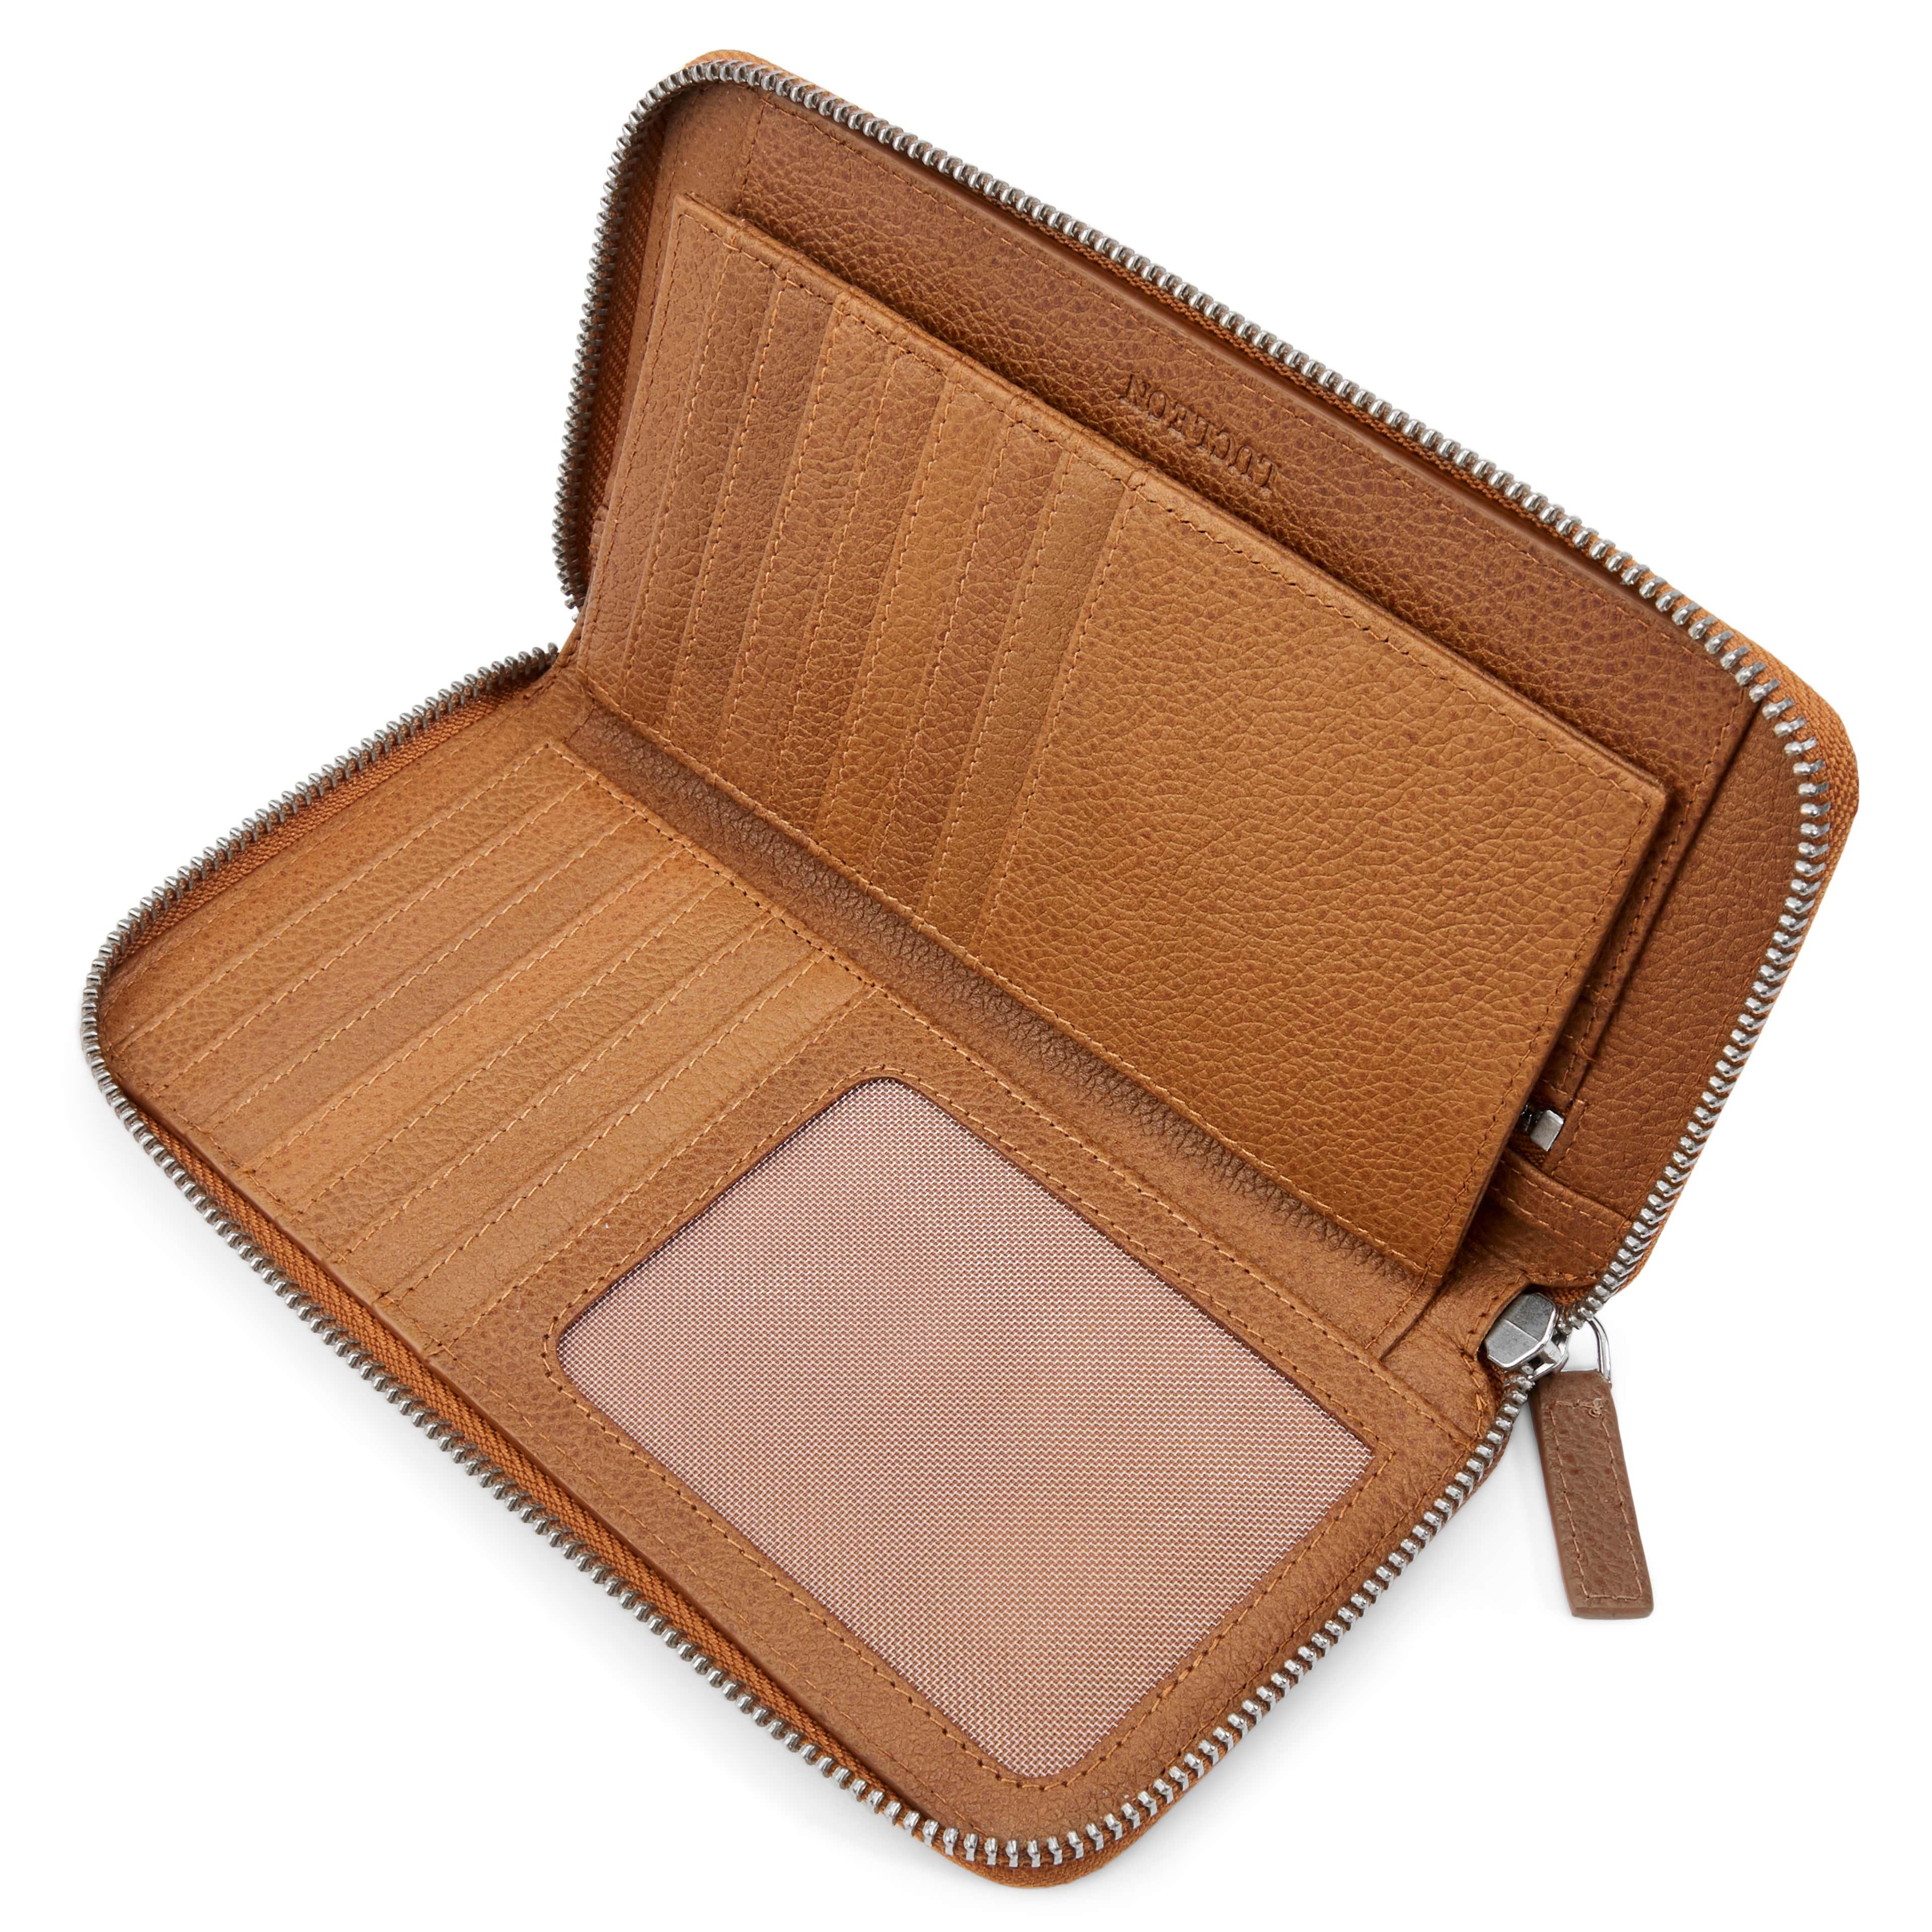 Lauri Tan Leather RFID-Blocking Wallet  - 2 - hover gallery